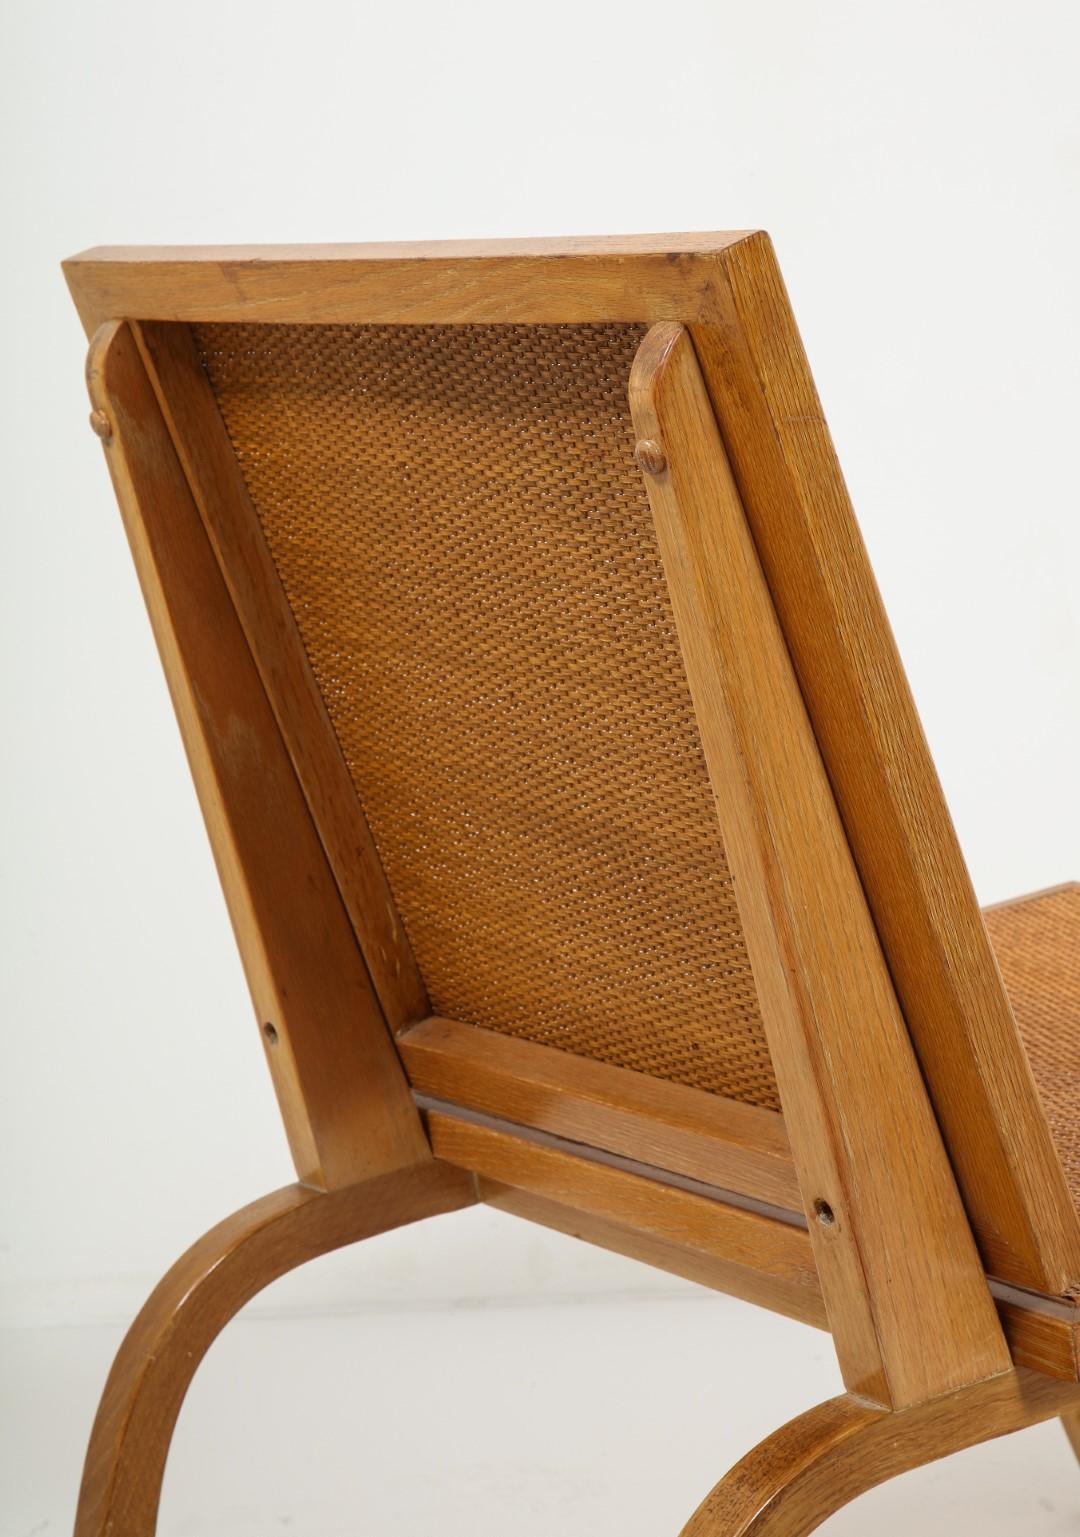 Midcentury Woven Oak Lounge Chair by Edward Durell Stone for Fulbright For Sale 4